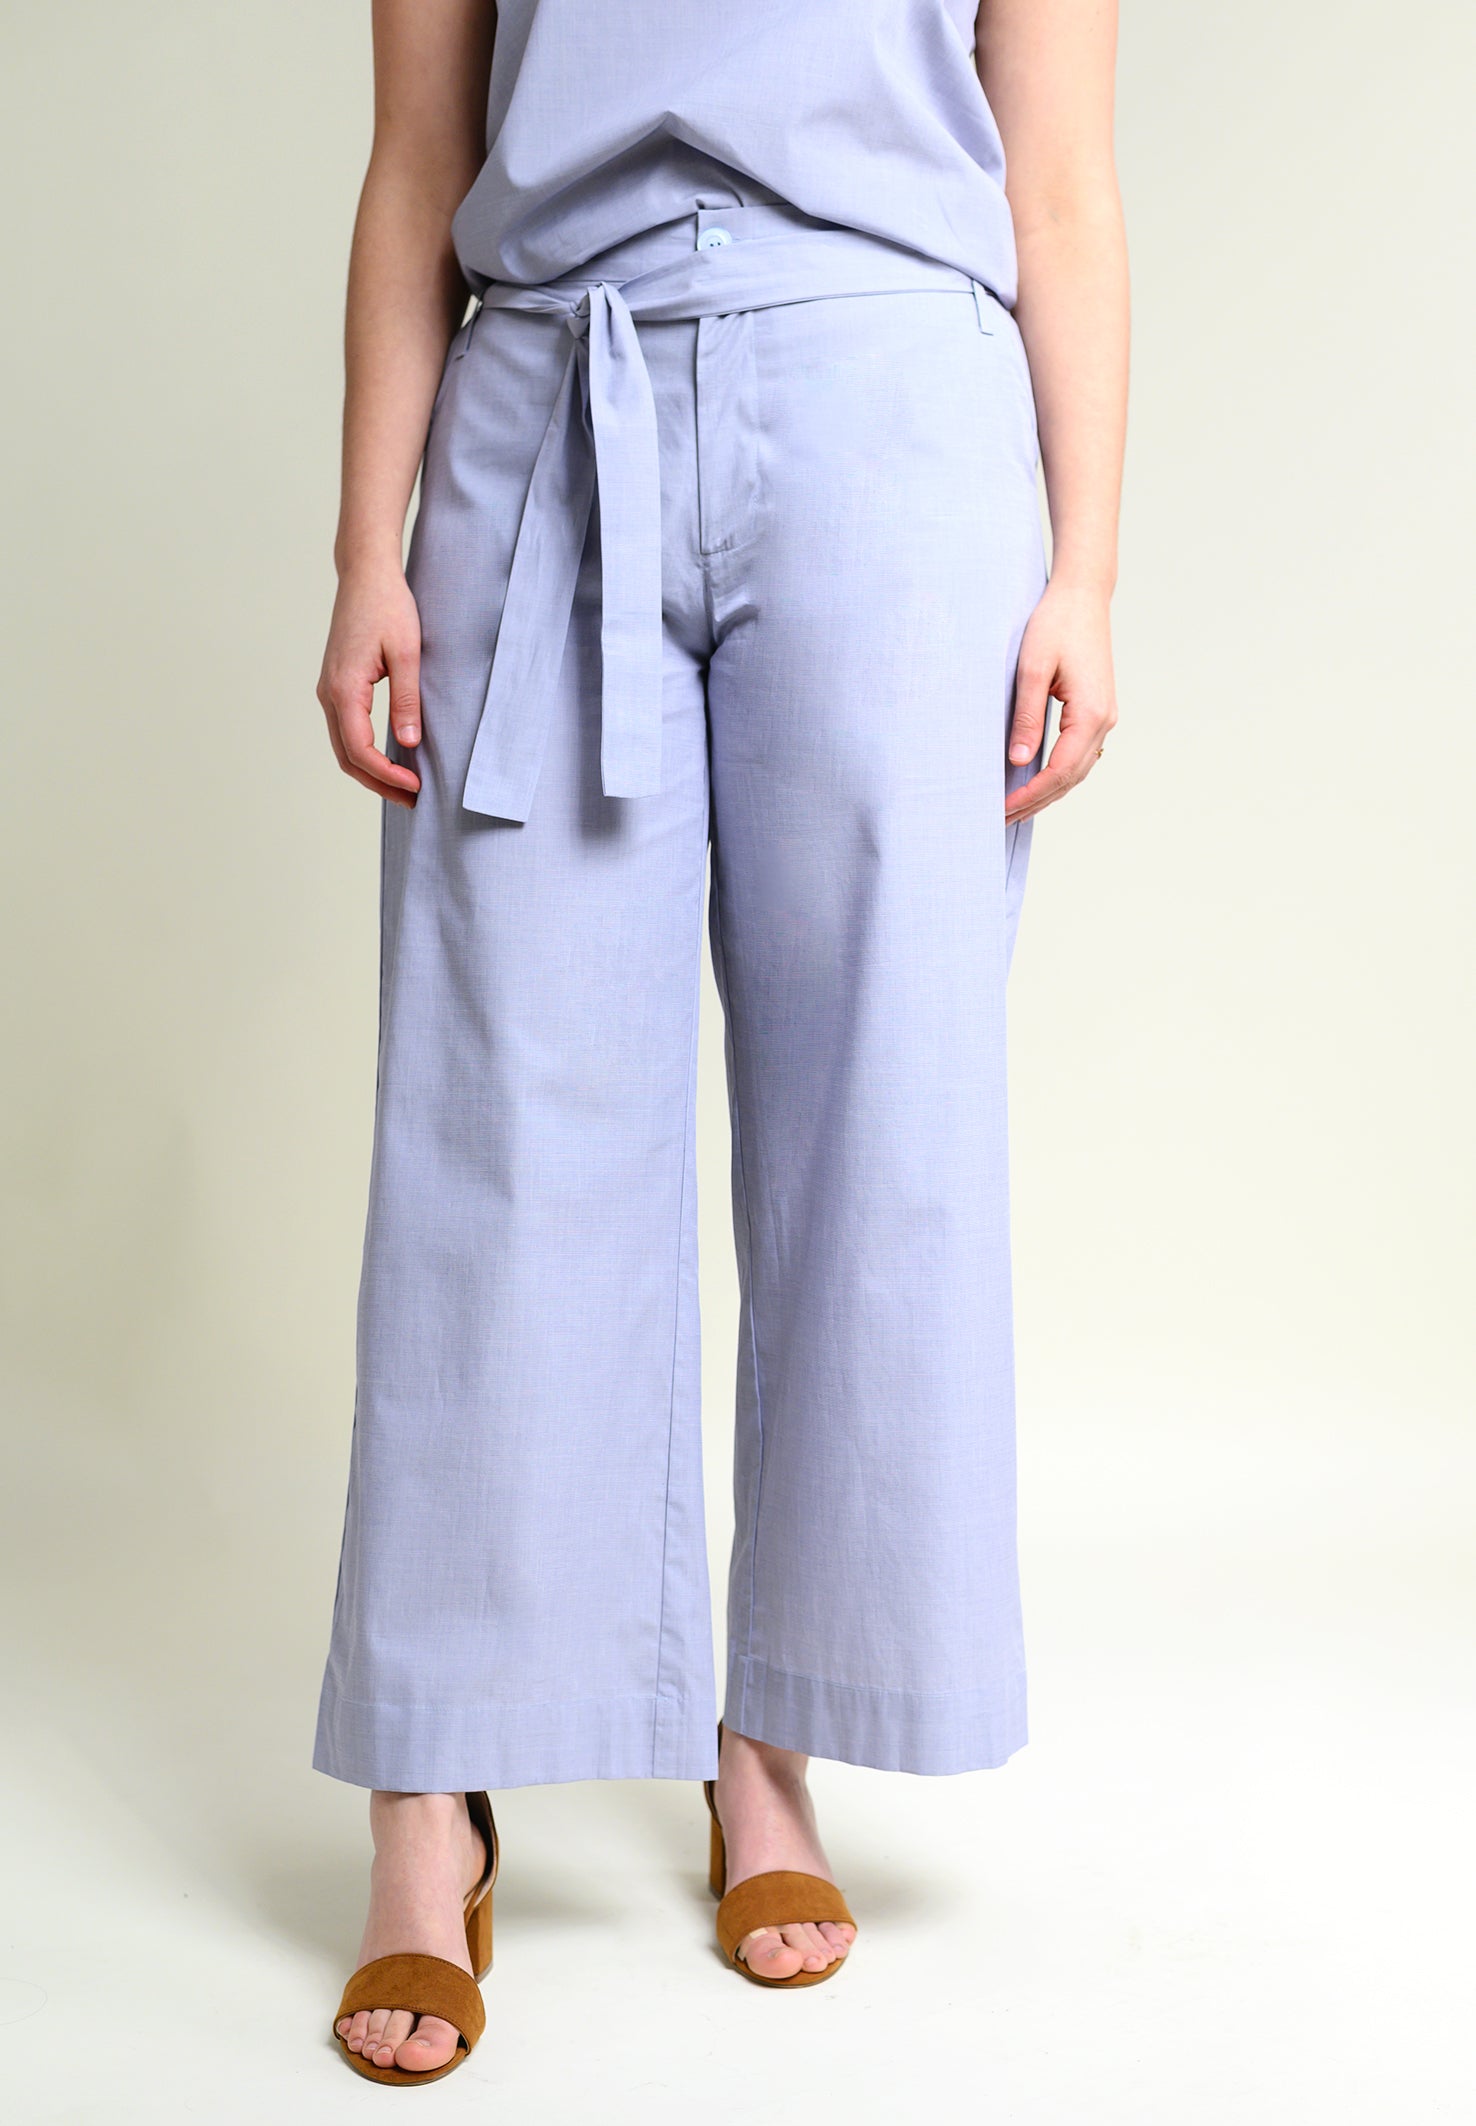 Culottes TERNAA in light blue made from 100% organic cotton